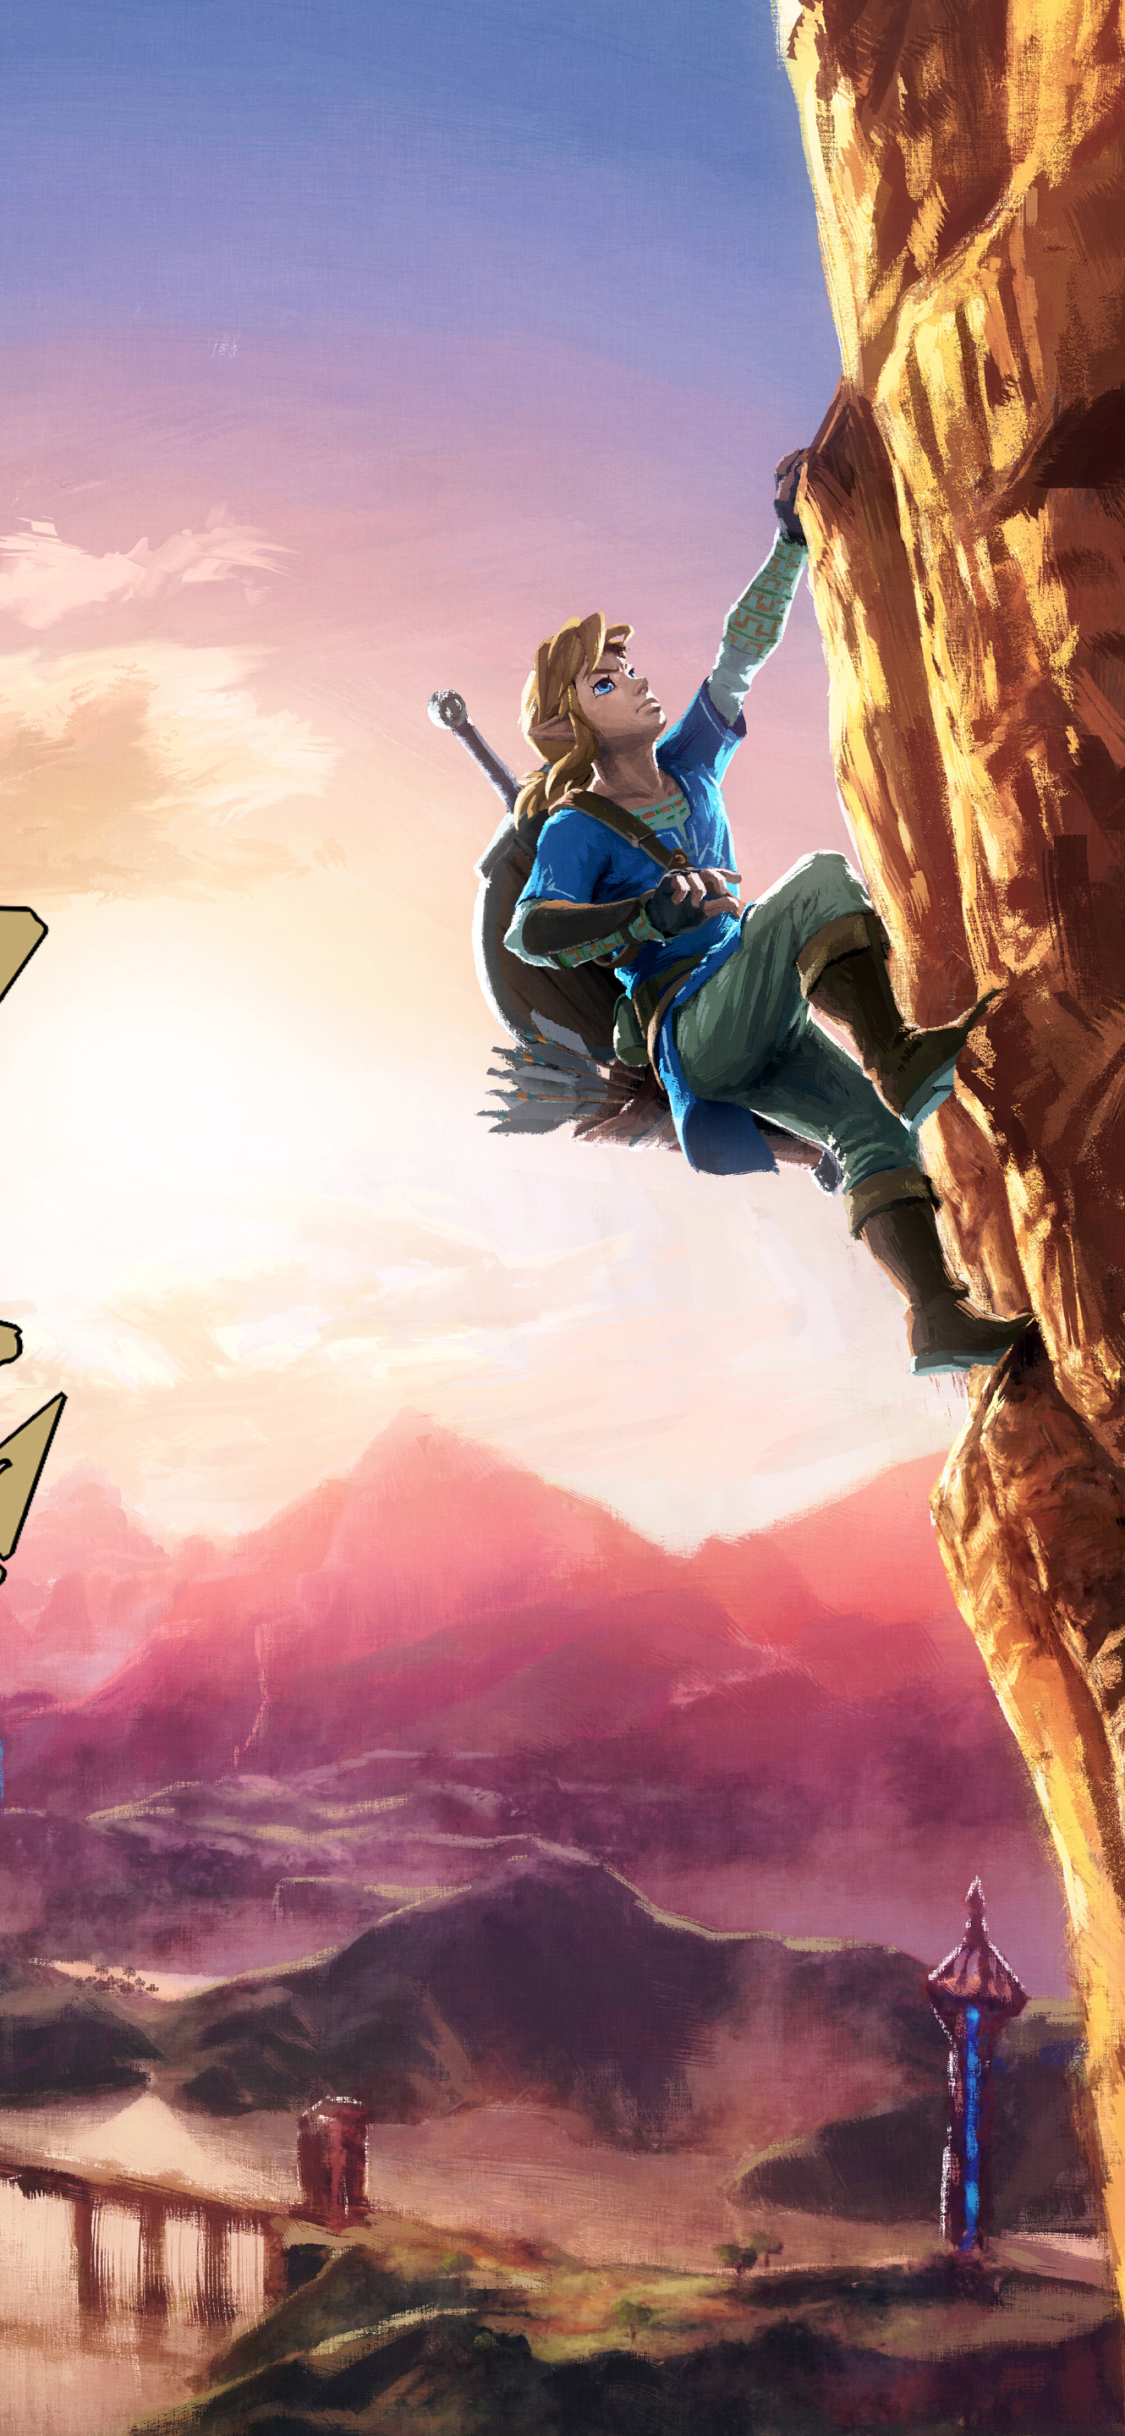 The Legend of Zelda: Breath of the Wild - with logo